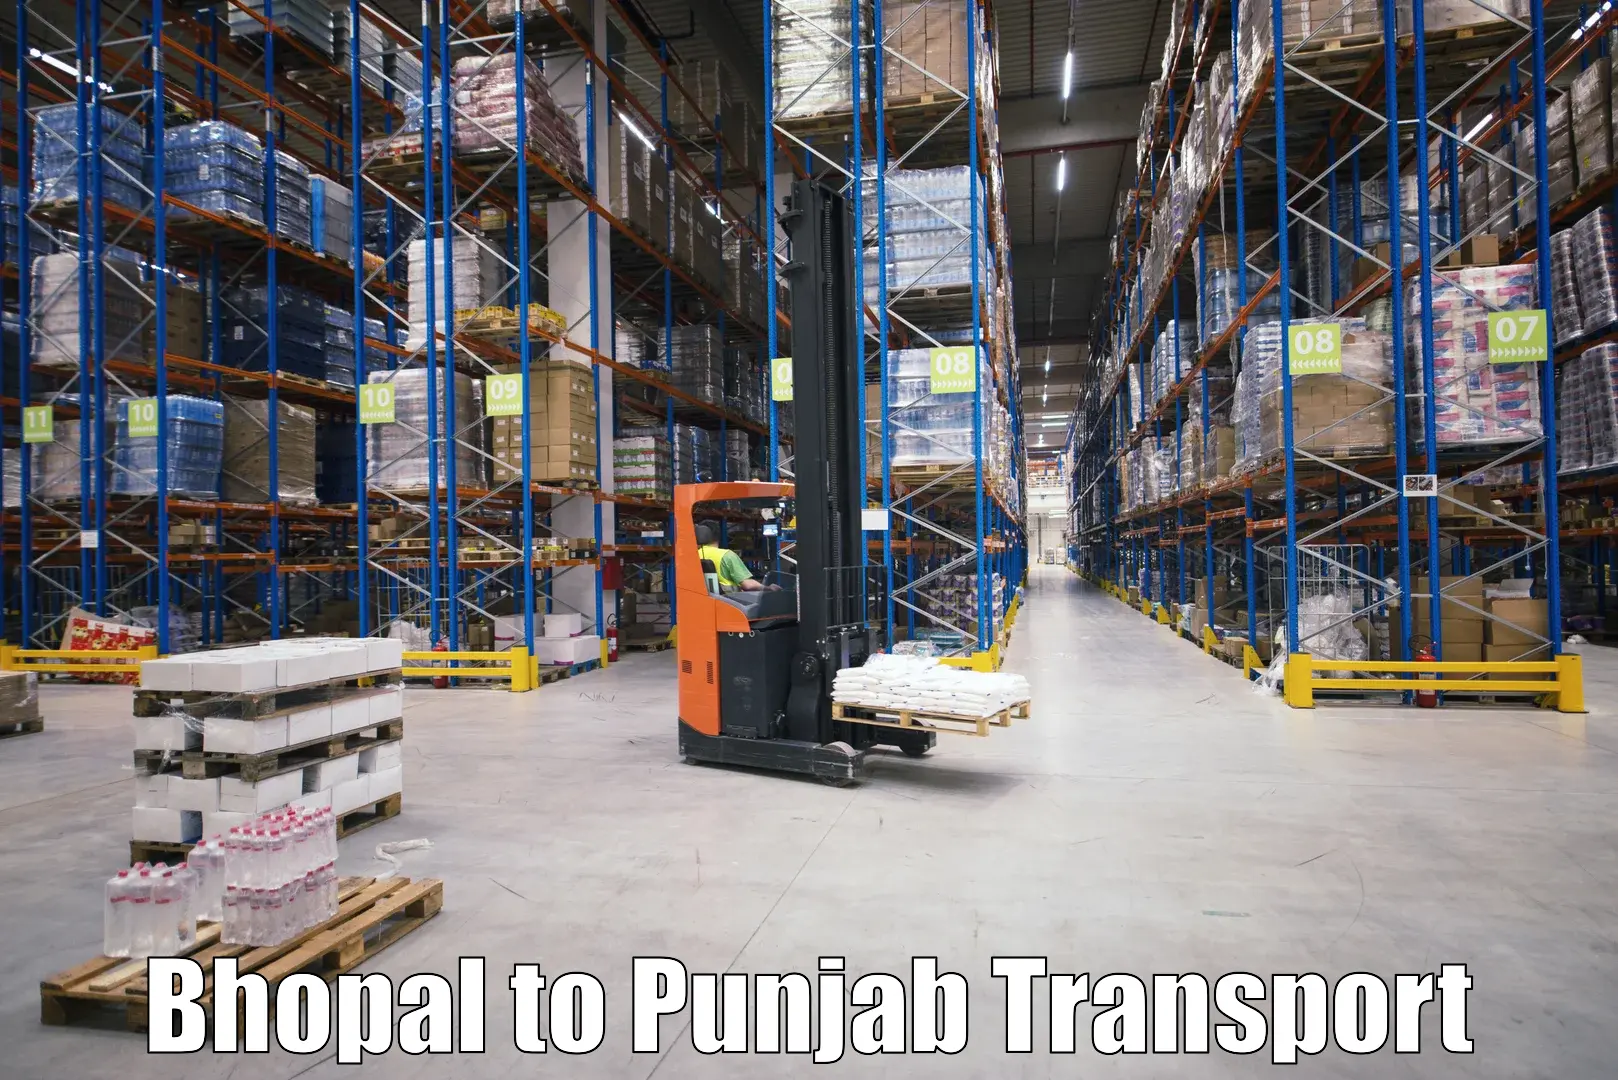 Express transport services Bhopal to Nabha